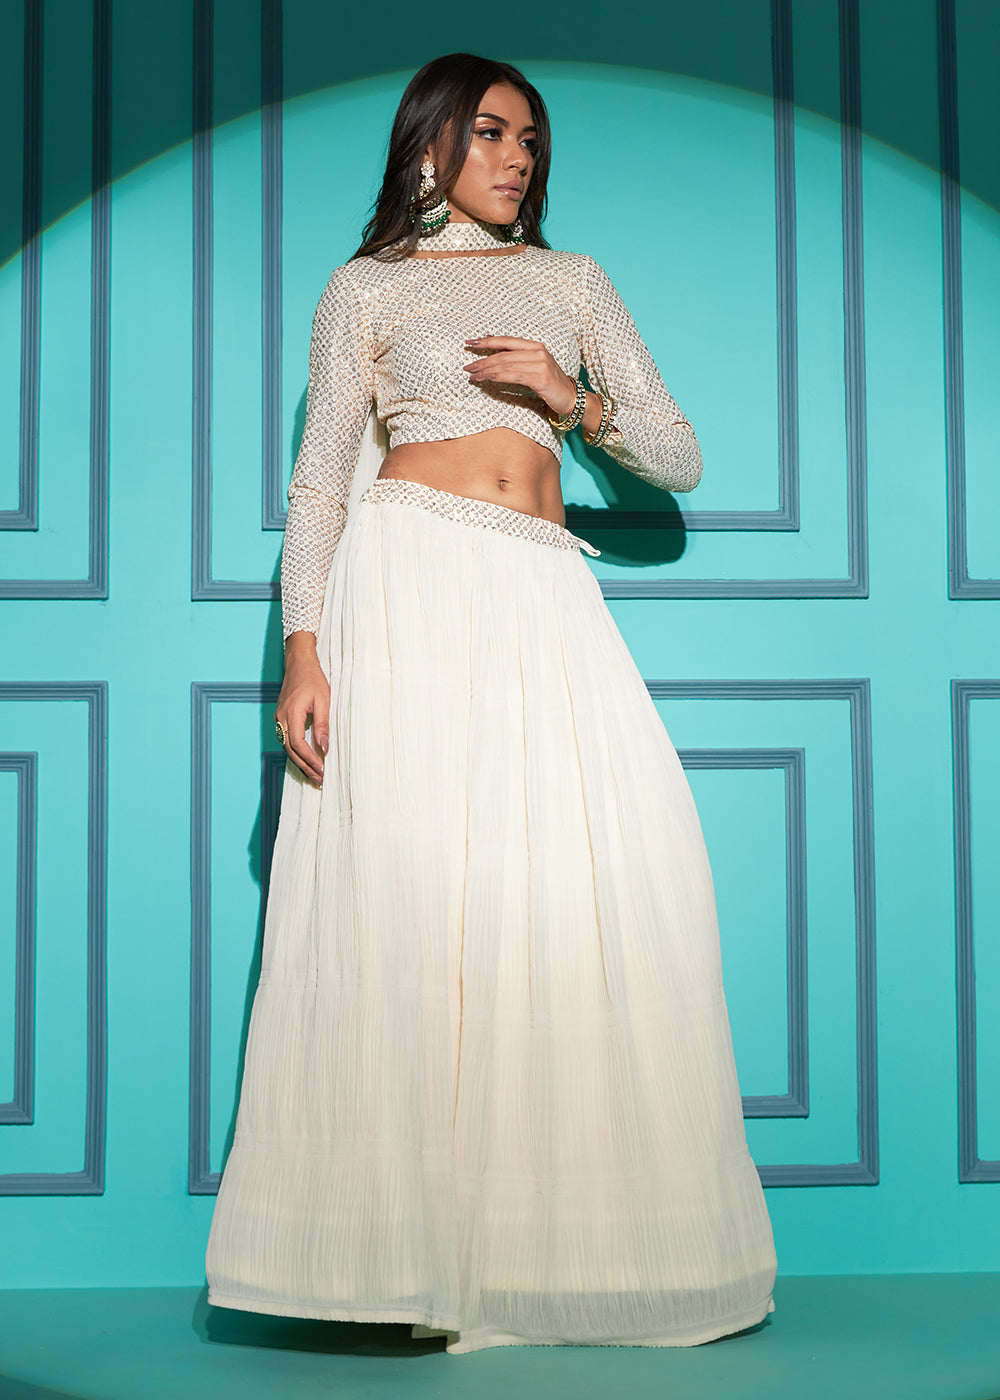 Buy Now Exquisite White Georgette Wedding Party Lehenga Choli Online in USA, UK, Canada & Worldwide at Empress Clothing.